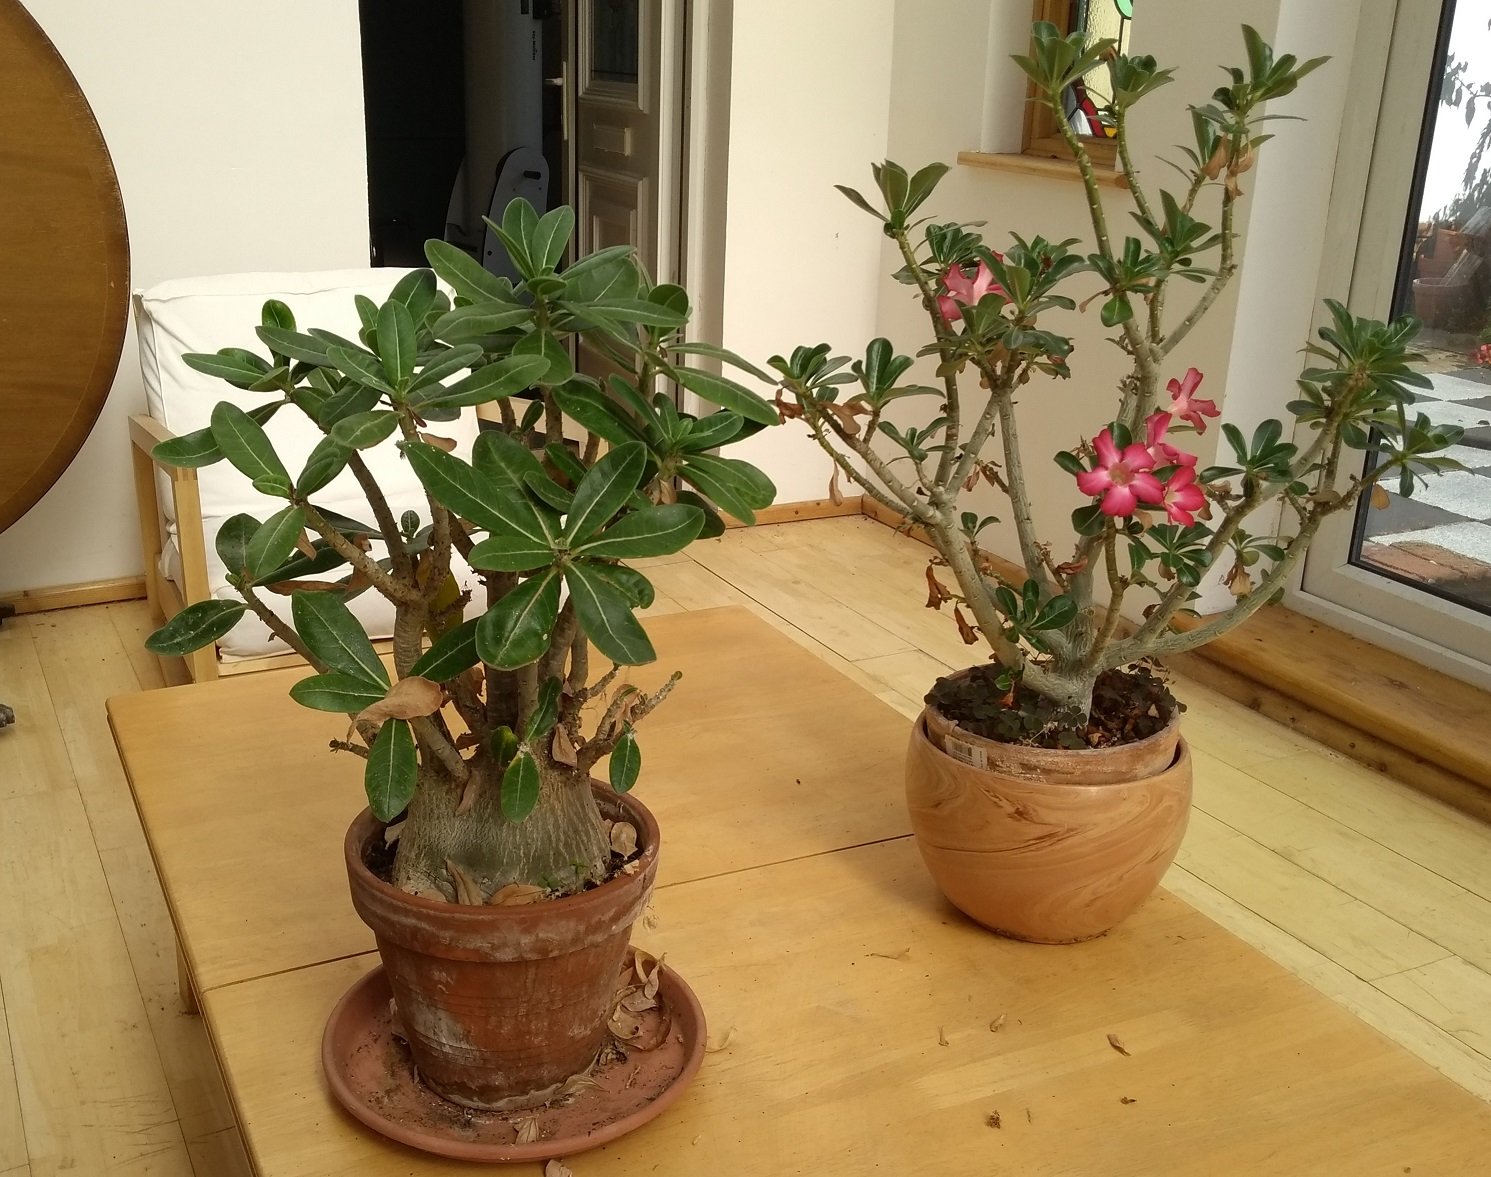 Trimming Desert Rose Plants: Learn About Desert Rose Pruning Techniques